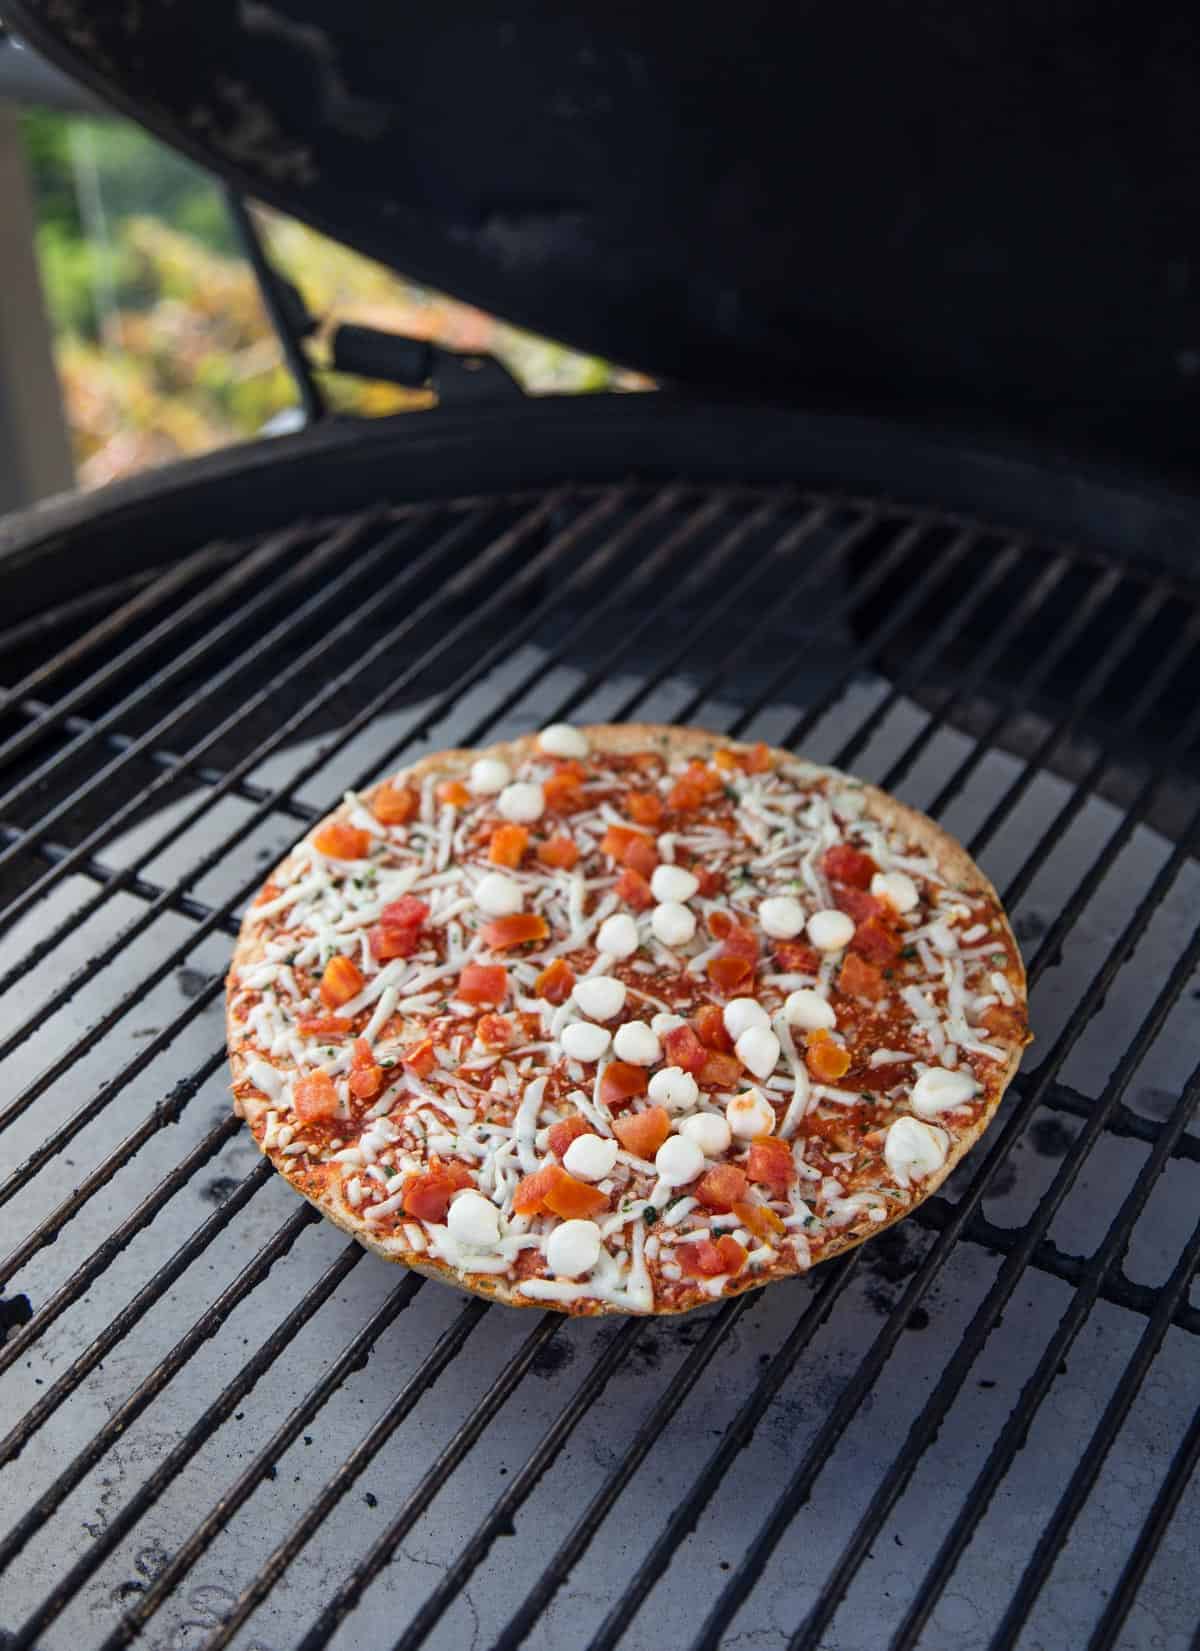 A frozen pizza cooking on a grill